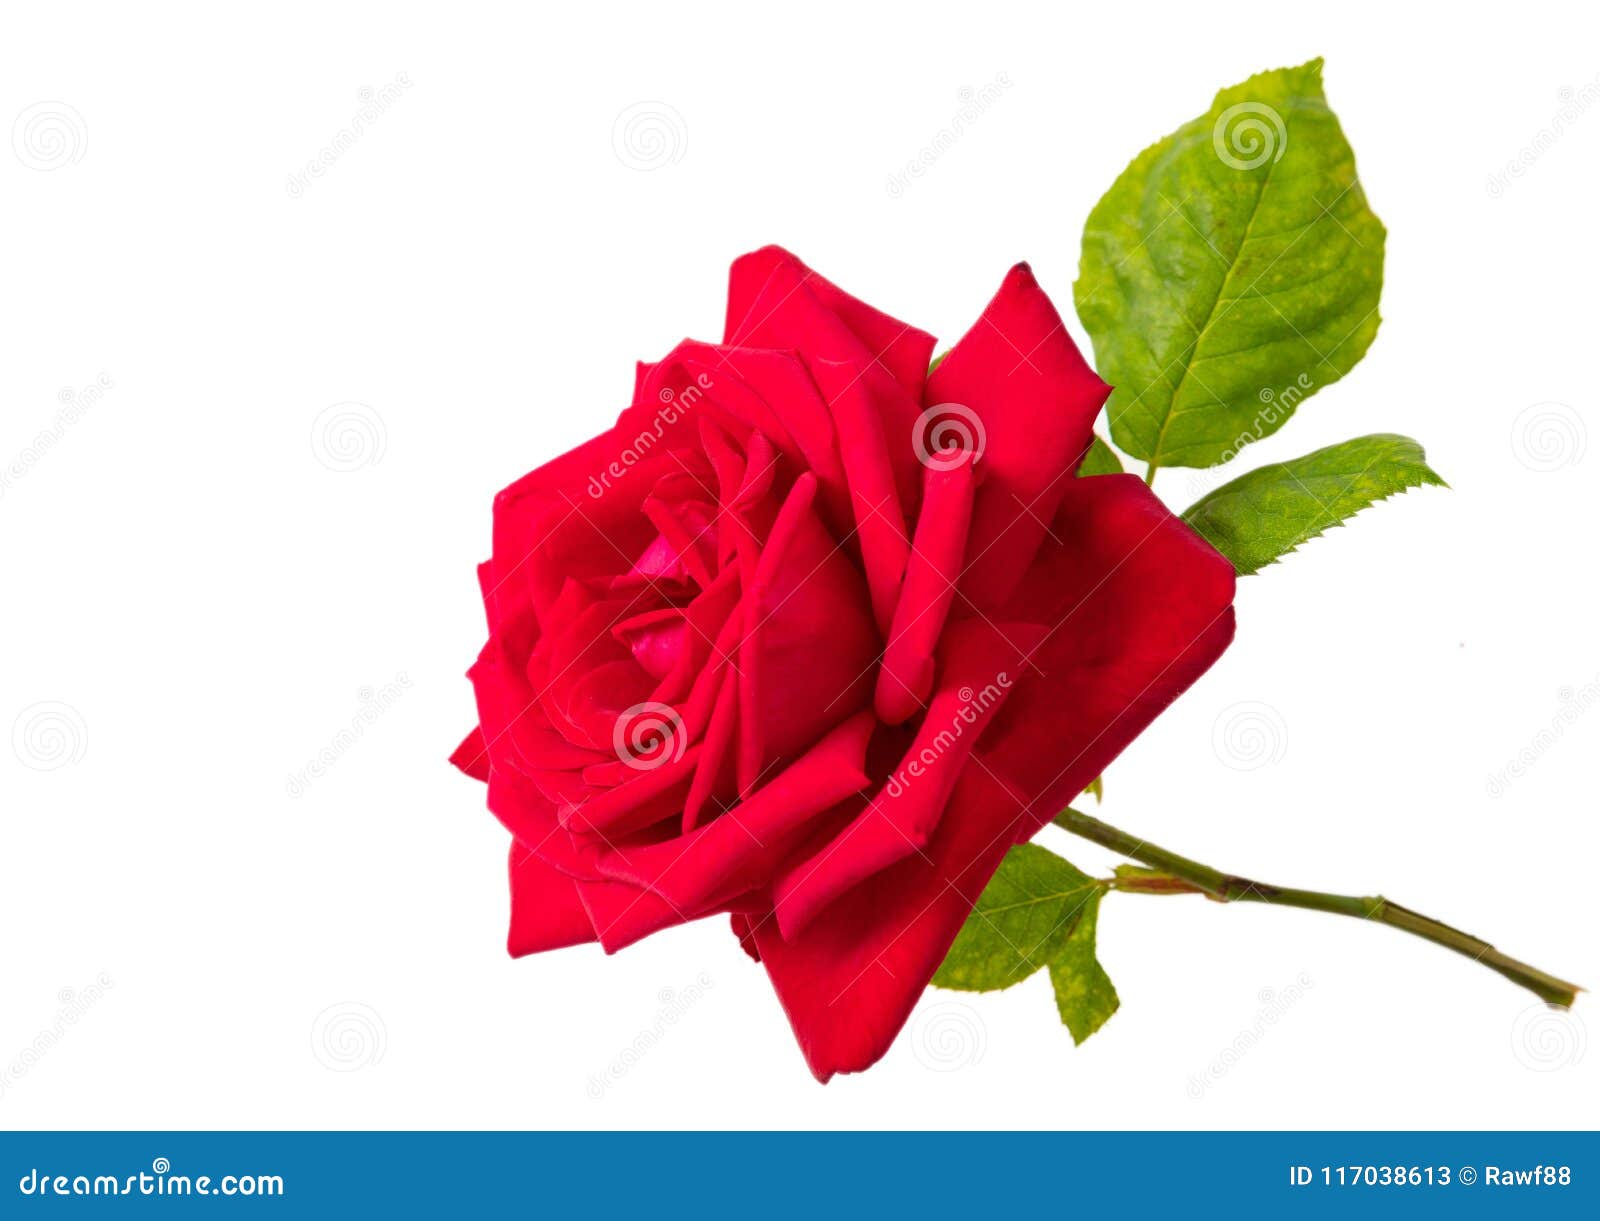 Rose Red Flower and Green Leaves Stem Isolated on White Background ...